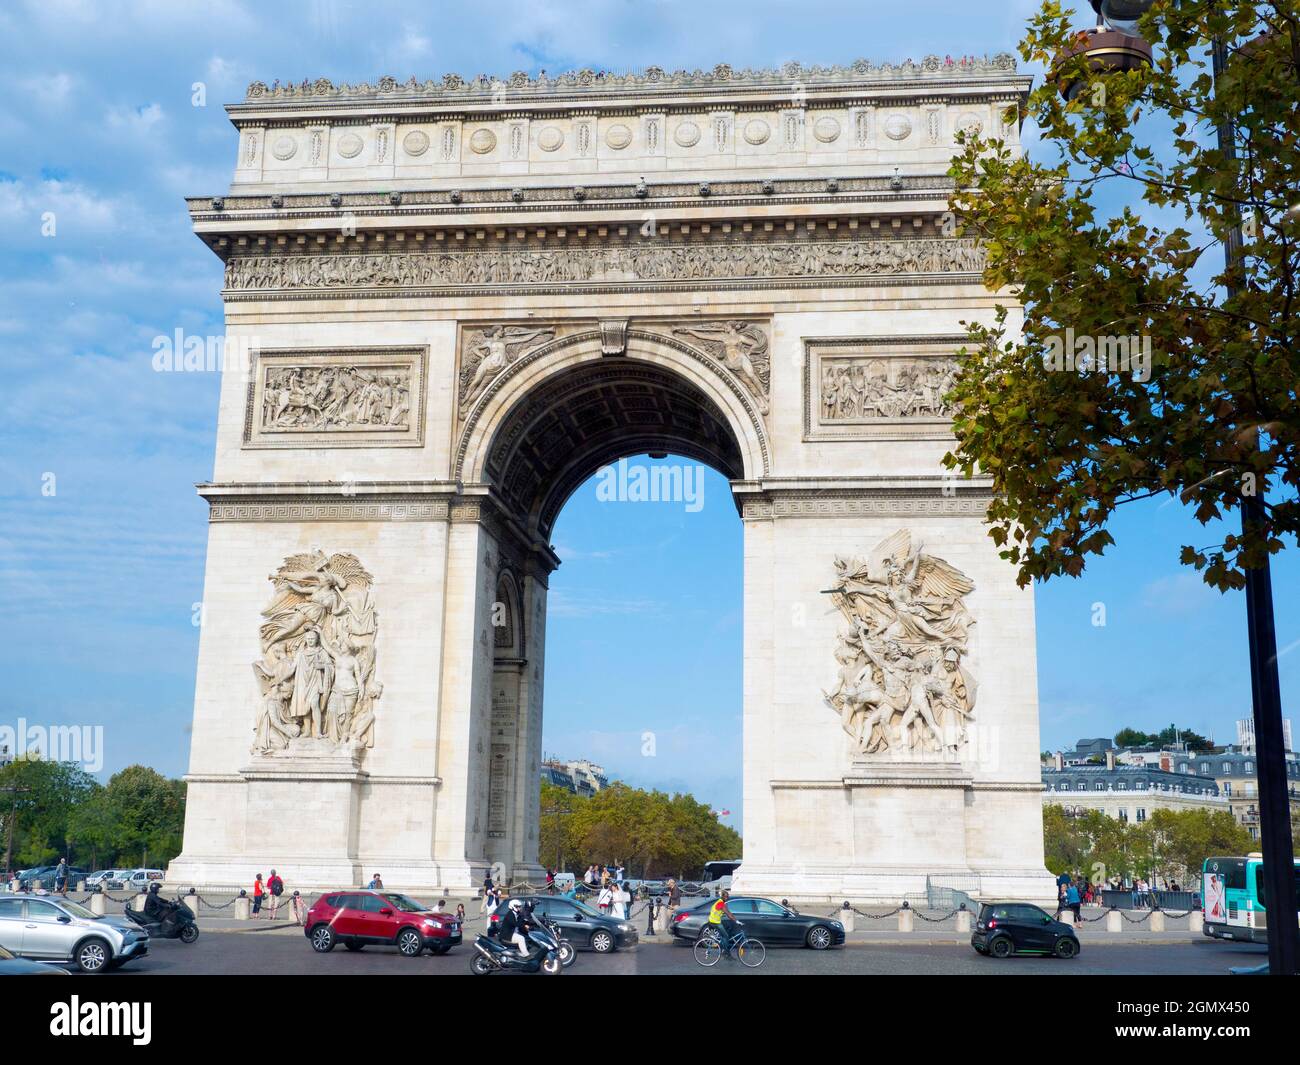 Paris, France -  18 September, 2018  The grand Arc de Triomphe de l'toile (Triumphal Arch of the Star, to give it its full name) is one of the most f Stock Photo